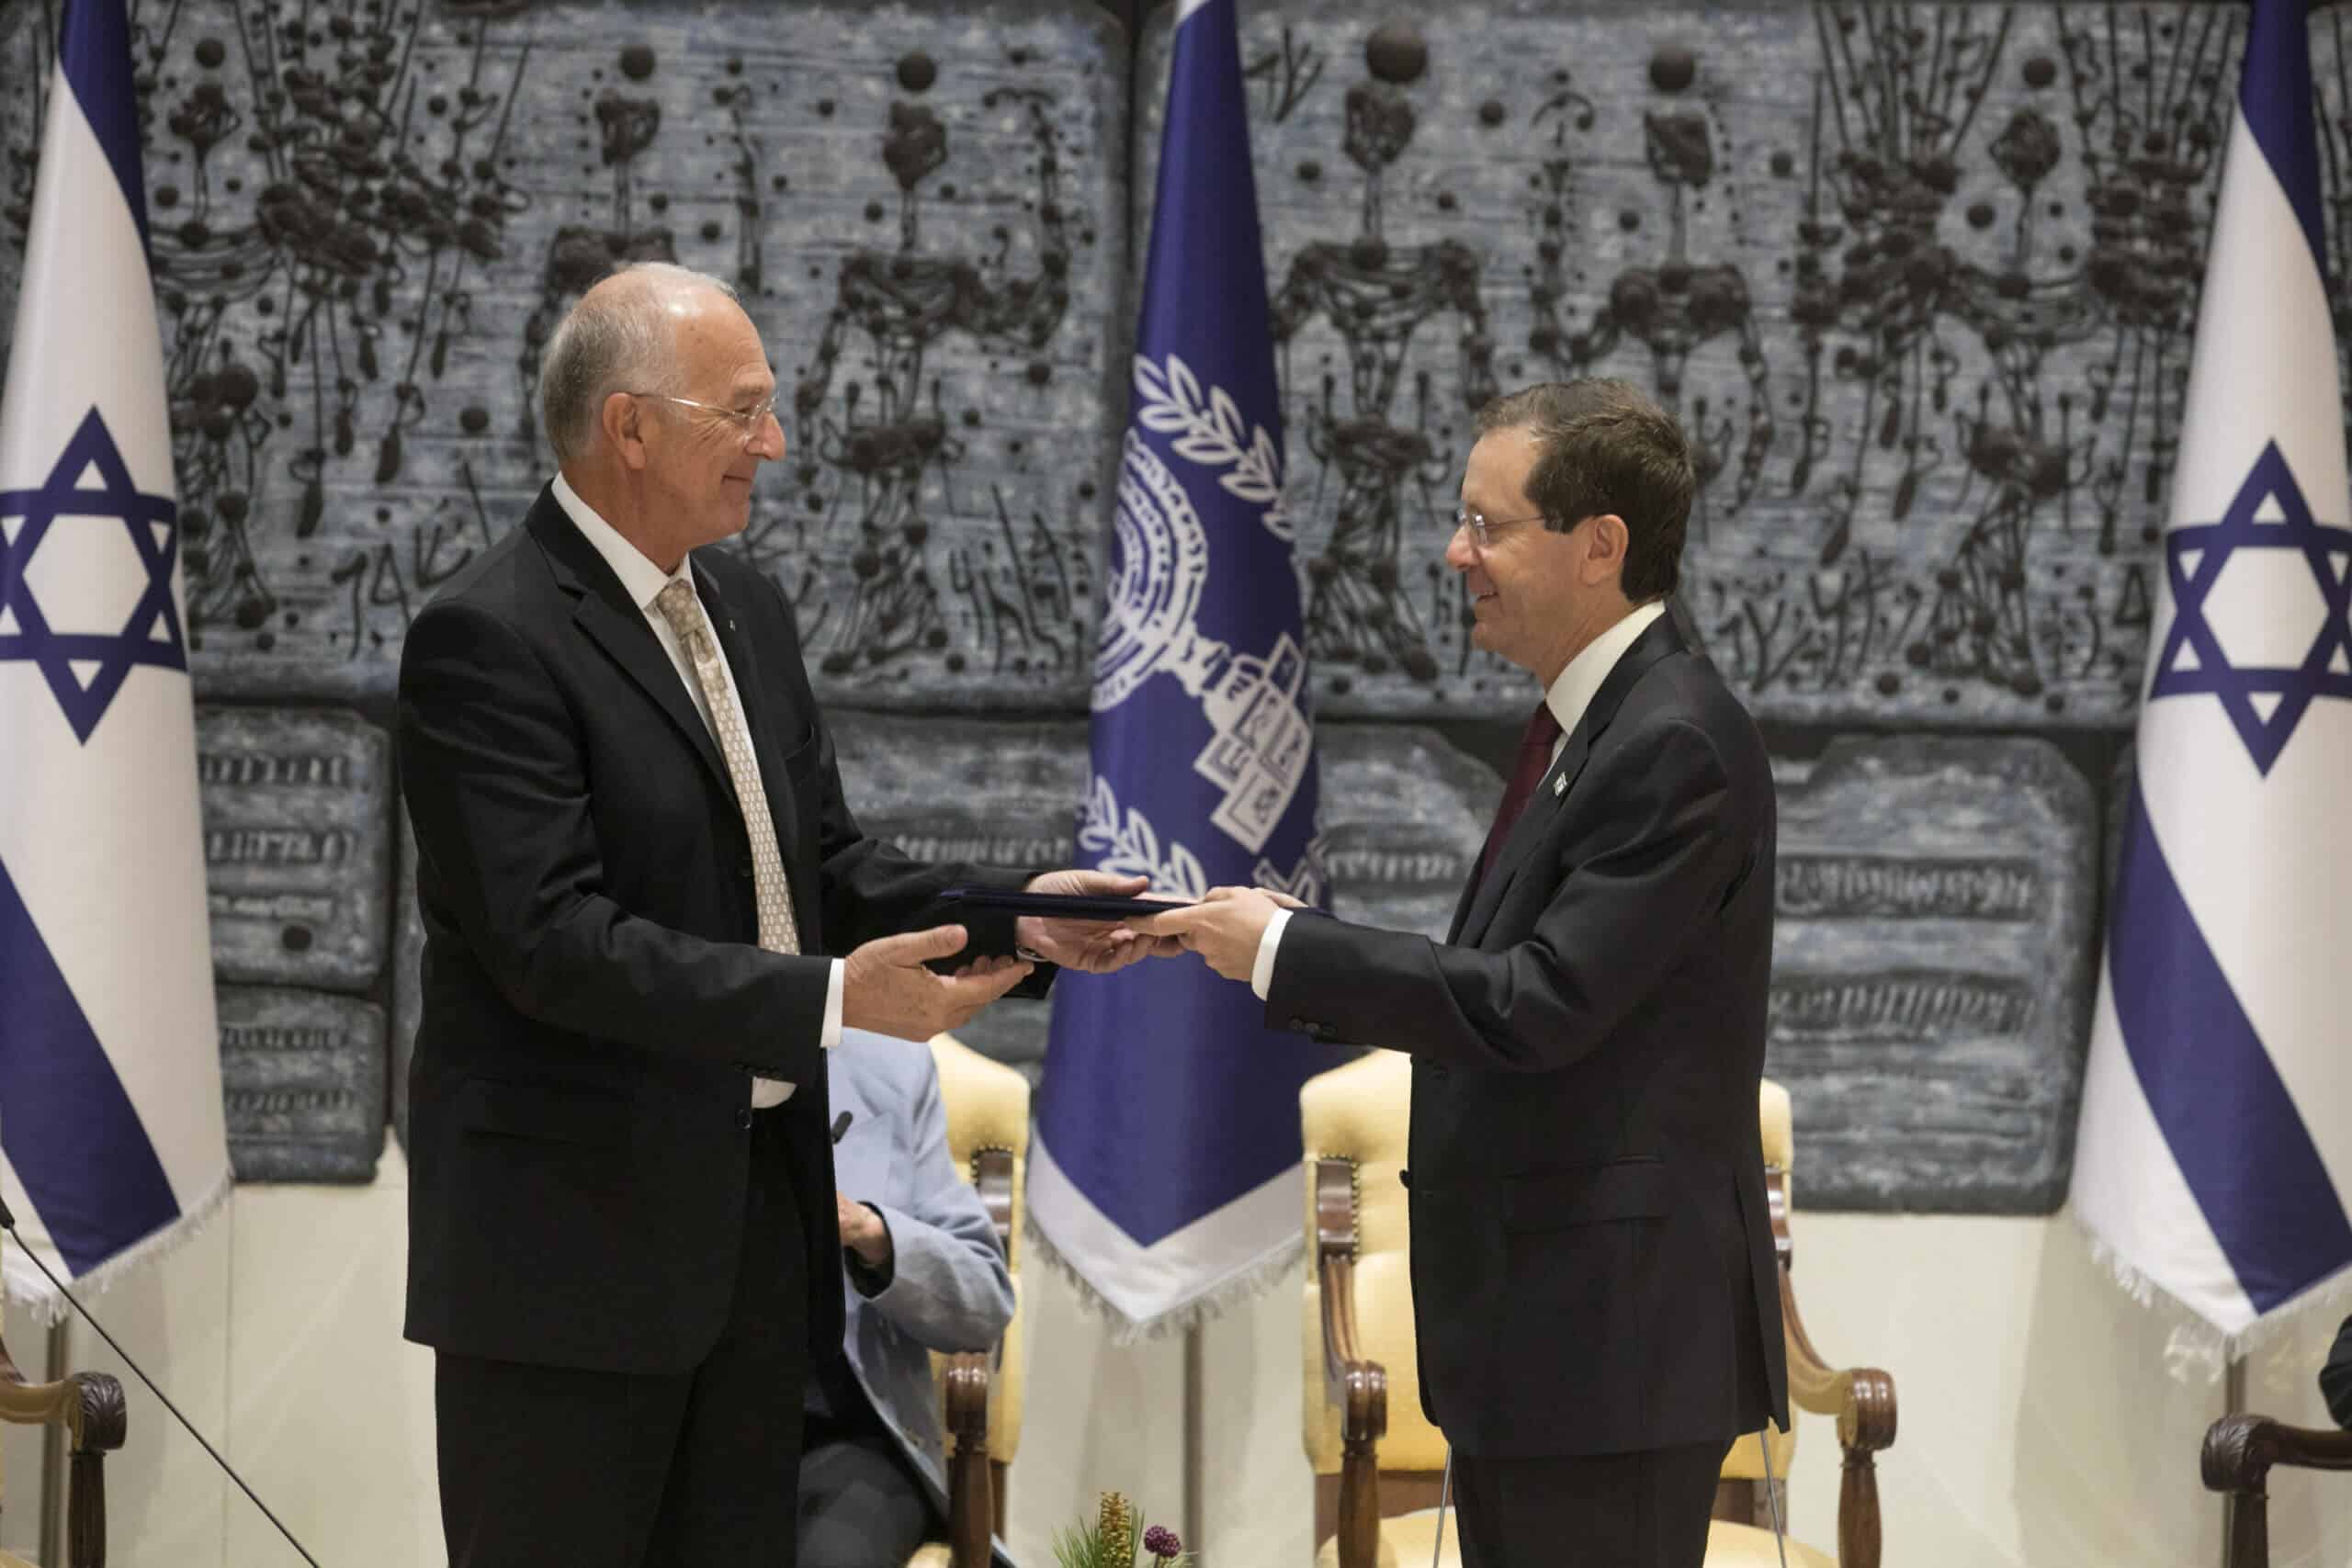 State President Yitzhak Herzog presents the letter of appointment to the incoming president of the Academy Prof. David Harel. Photo credit: Israel National Academy of Sciences